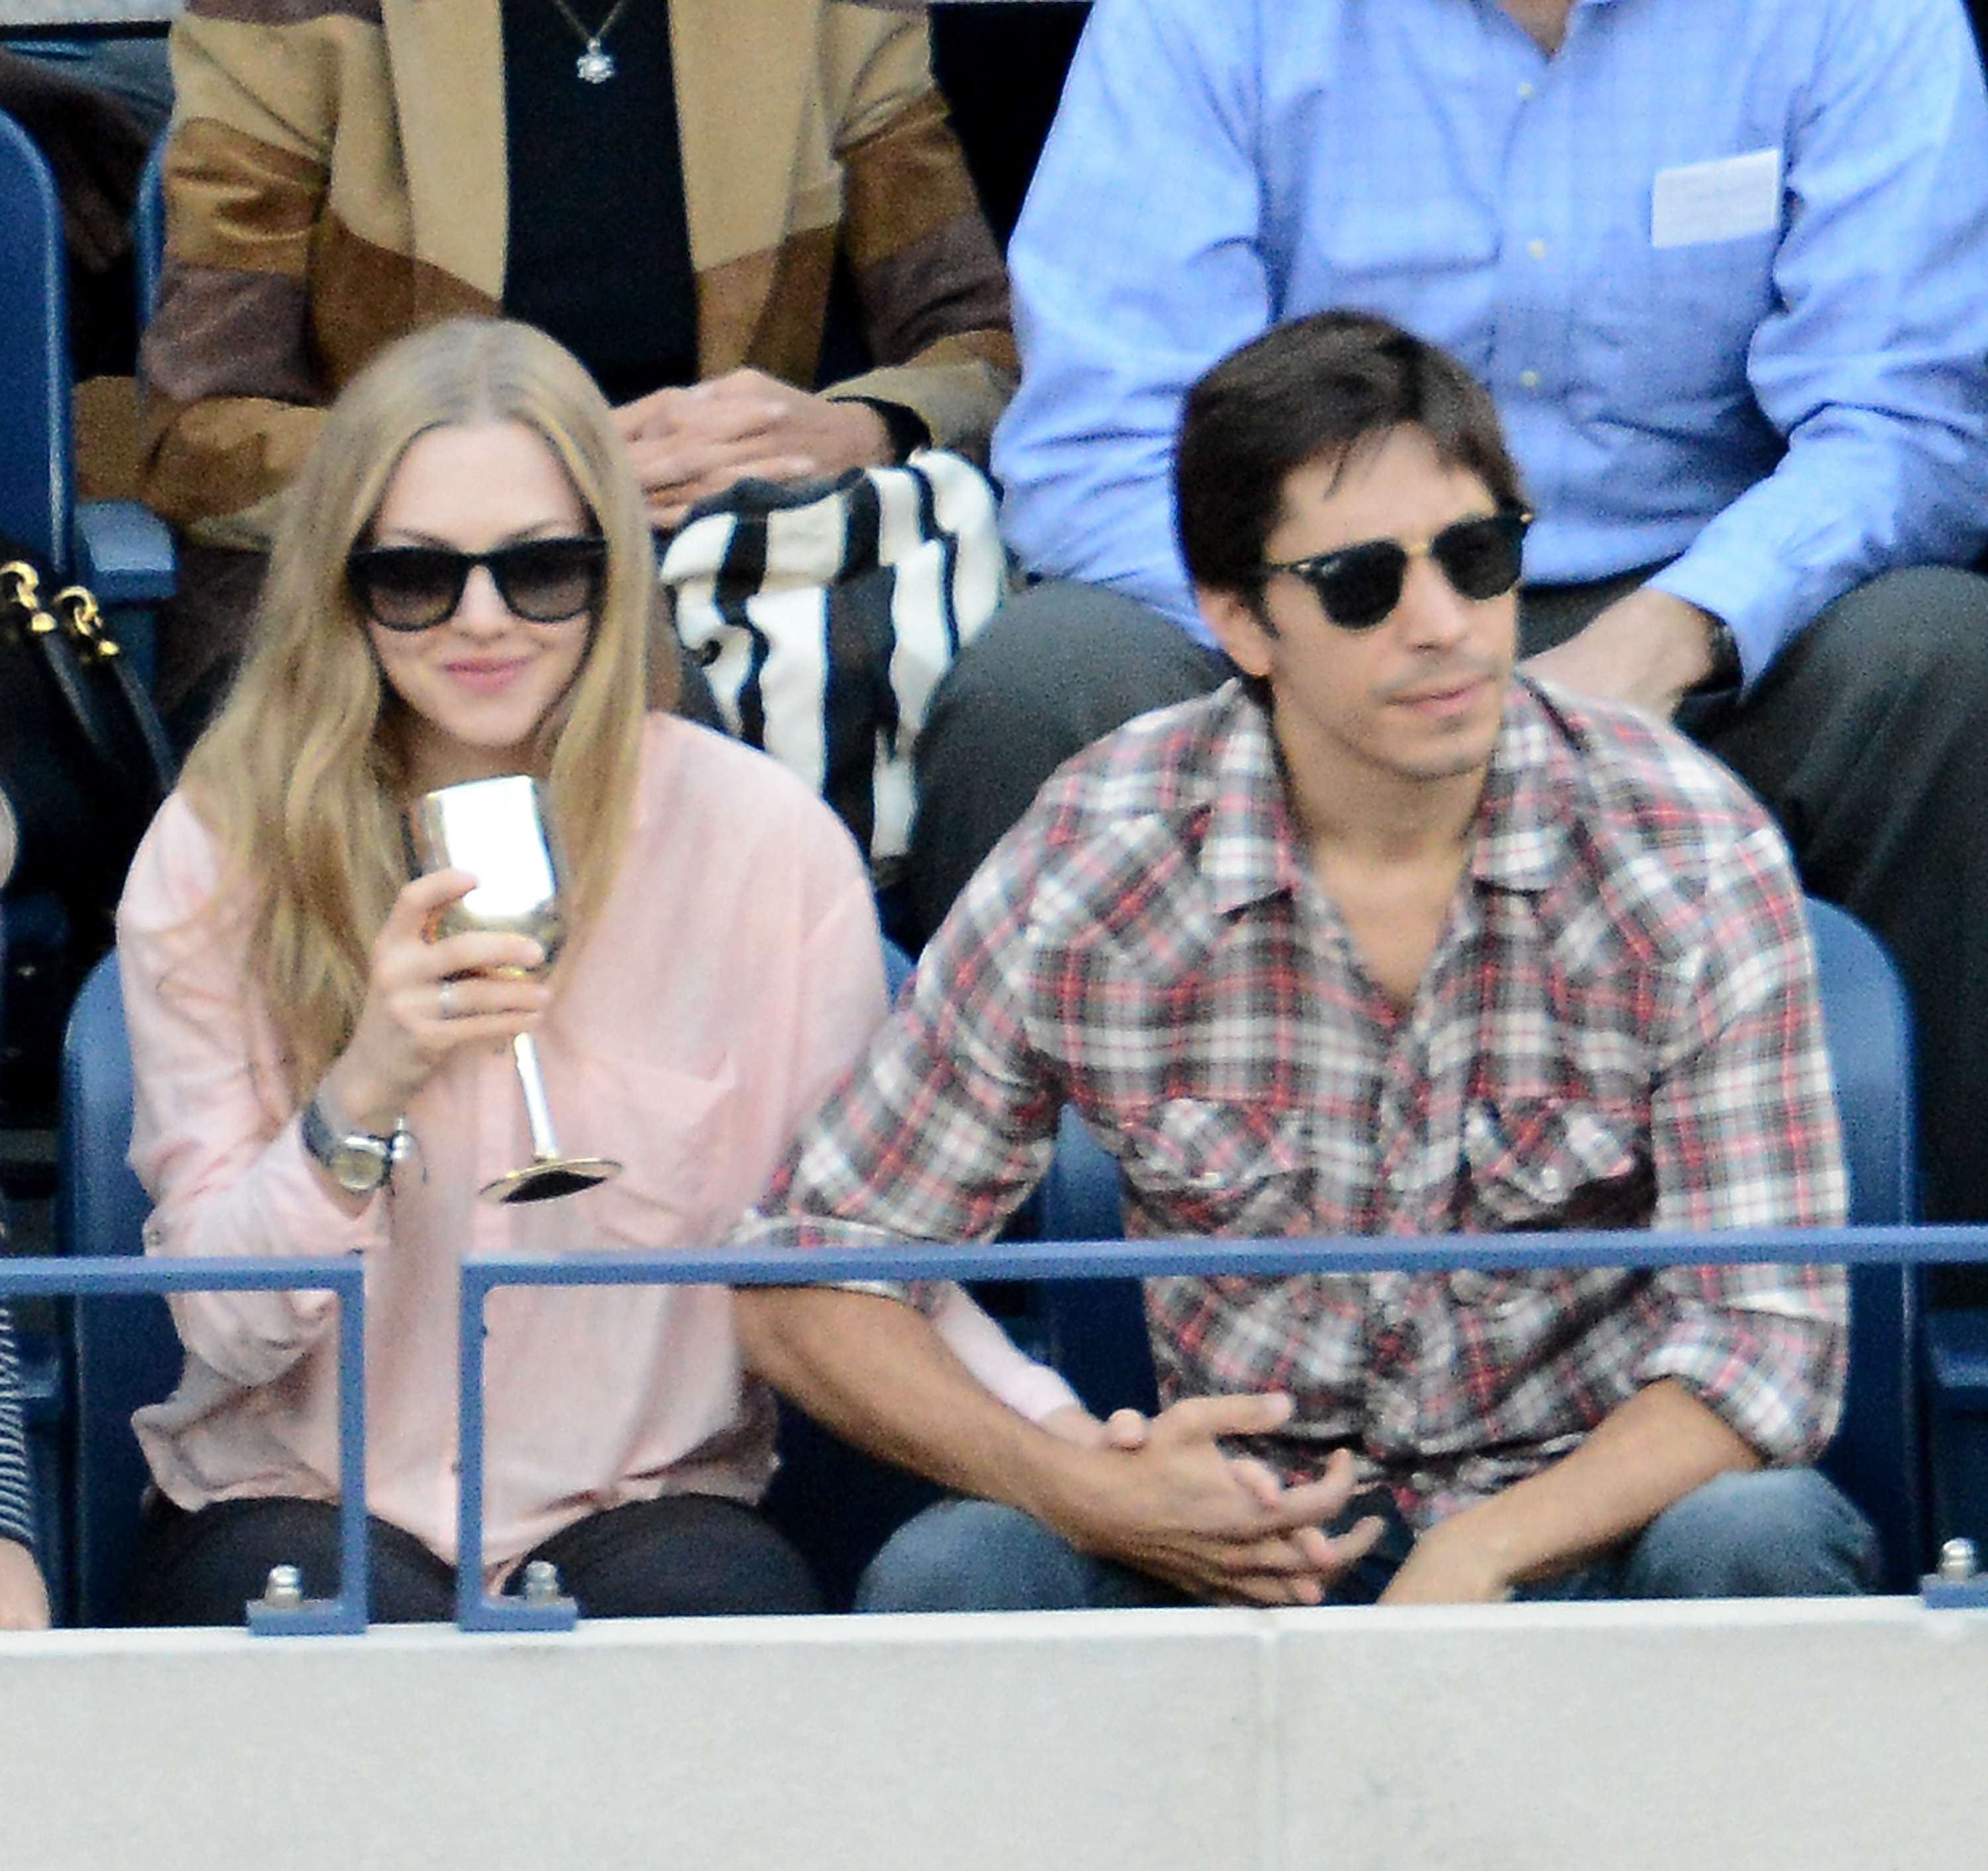 Actress Amanda Seyfried (L) and Justin Long attend The Moet & Chandon Suite at USTA Billie Jean King National Tennis Center on September 9, 2013 in New York City.  (Photo by Brad Barket/Getty Images for Moet & Chandon)